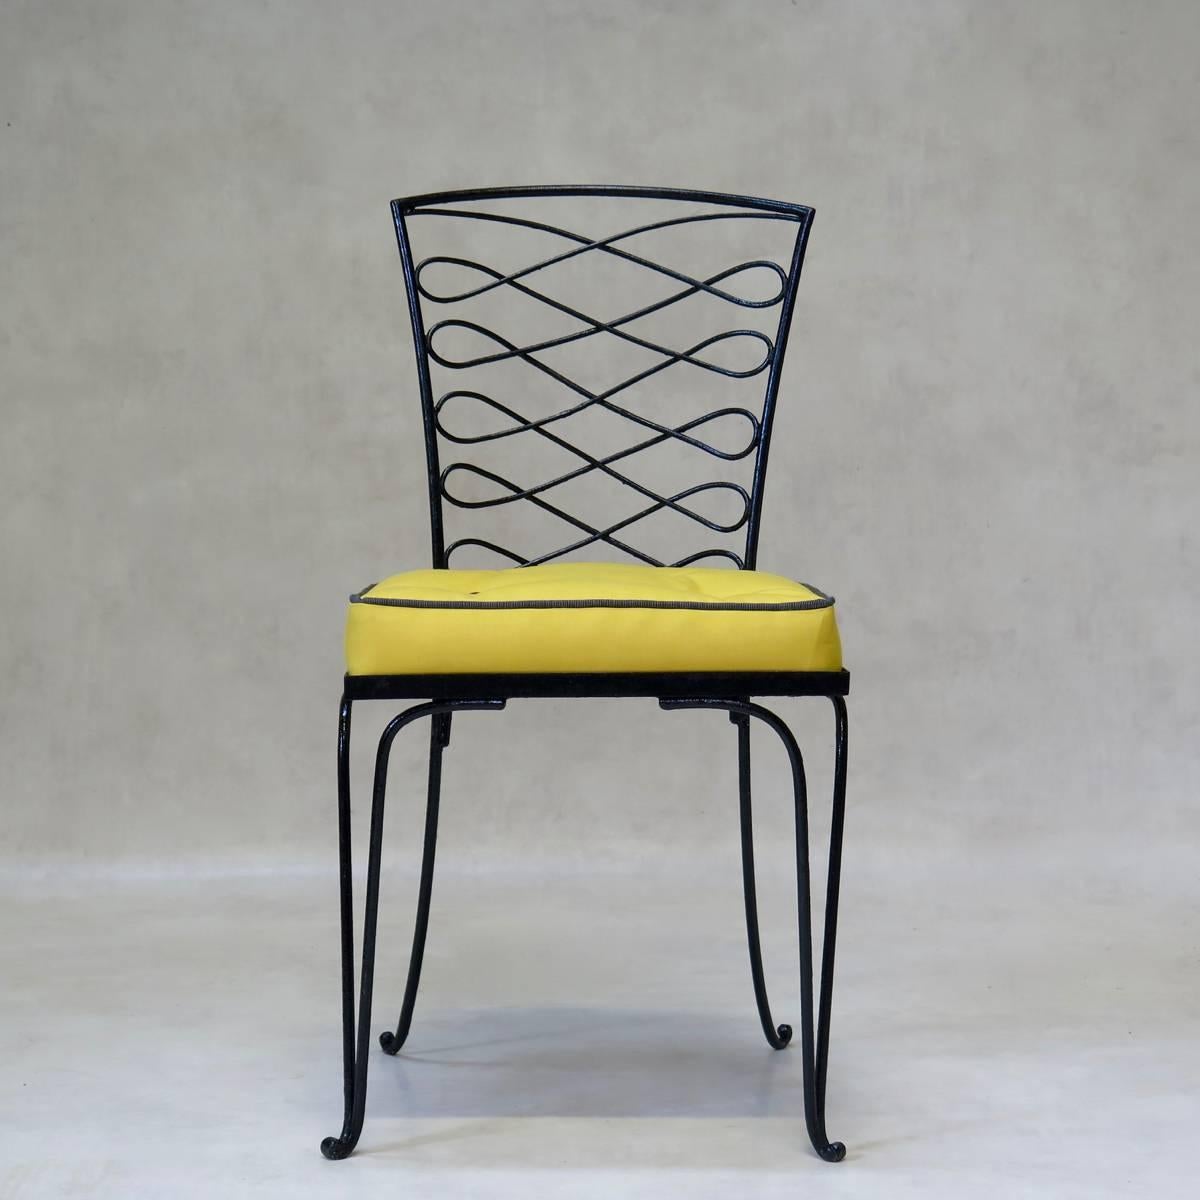 Chic set of four wrought iron side chairs by René Prou. The ironwork is painted glossy black. New seat cushions, covered in yellow outdoor fabric with contrasting dark grey buttons.